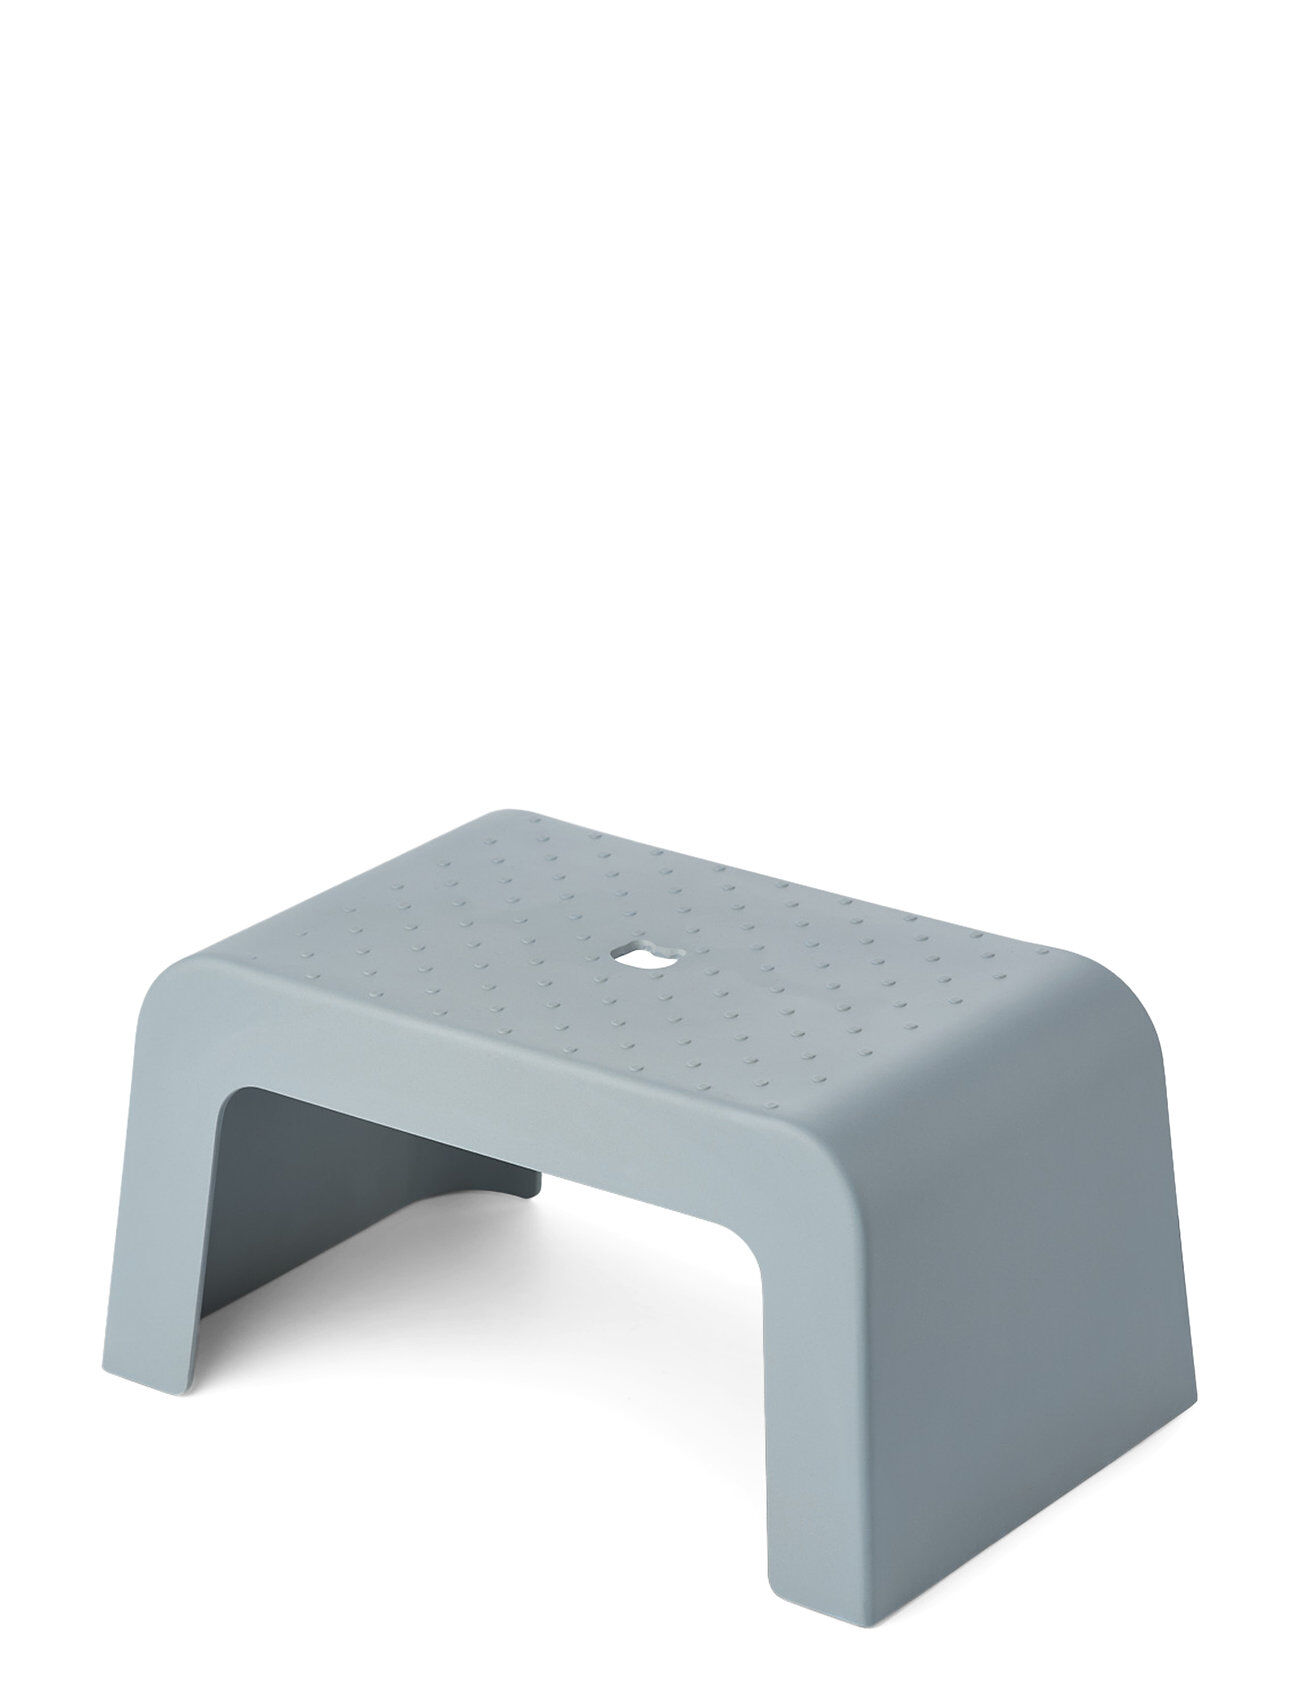 Liewood Ulla Step Stool Home Furniture Chairs & Stools Blå Liewood